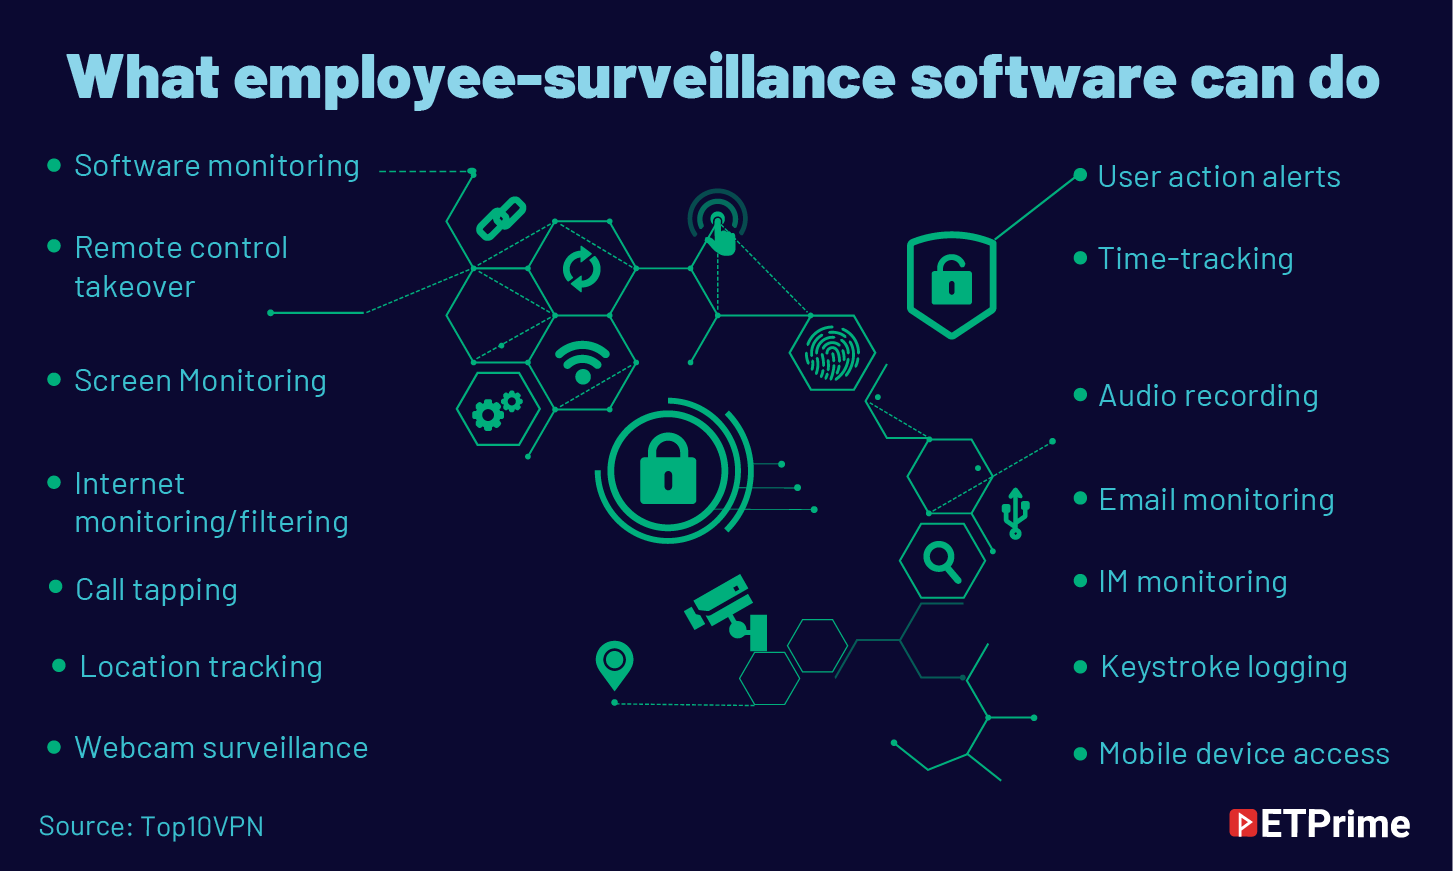 What employee-surveillance software can do